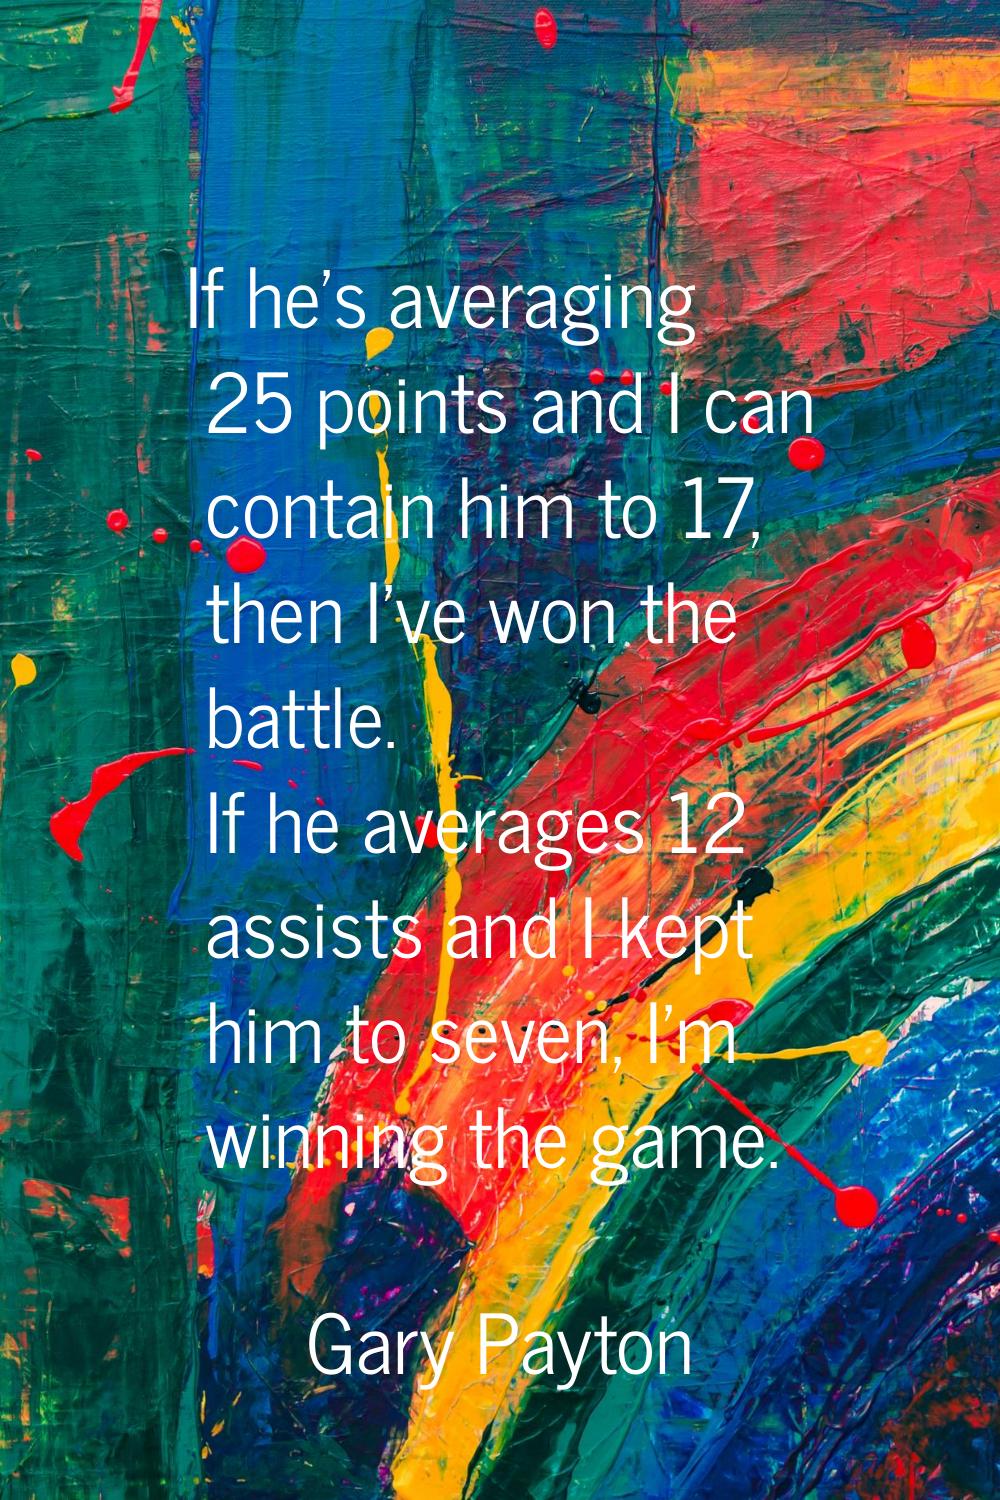 If he's averaging 25 points and I can contain him to 17, then I've won the battle. If he averages 1